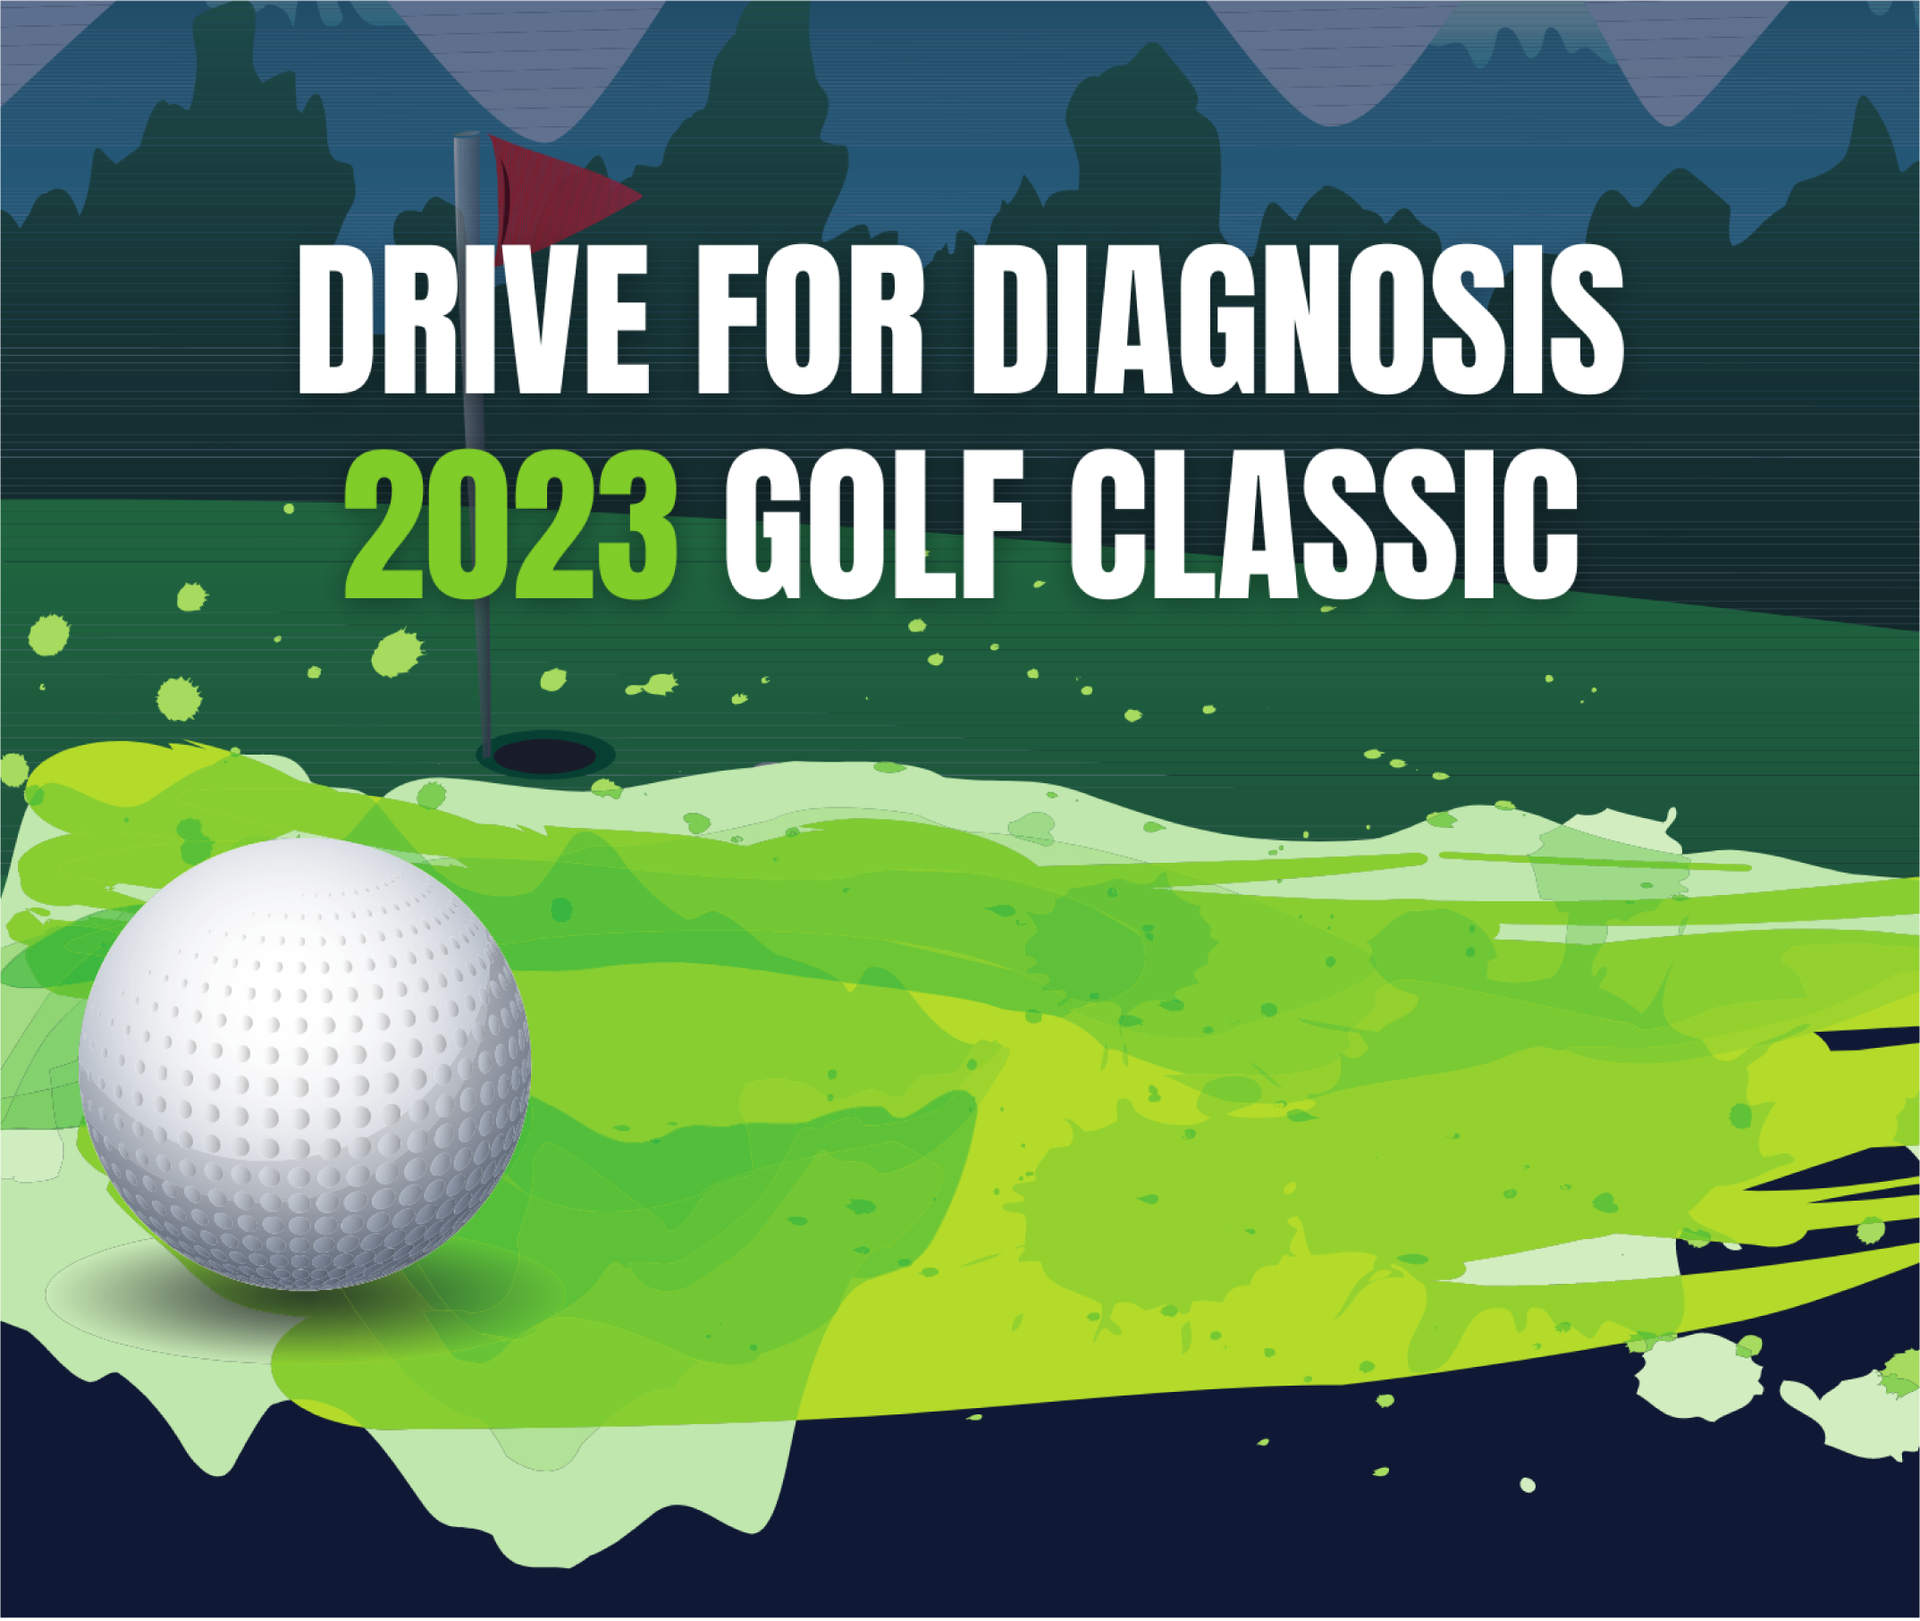 2023 Golf Classic Save the Date